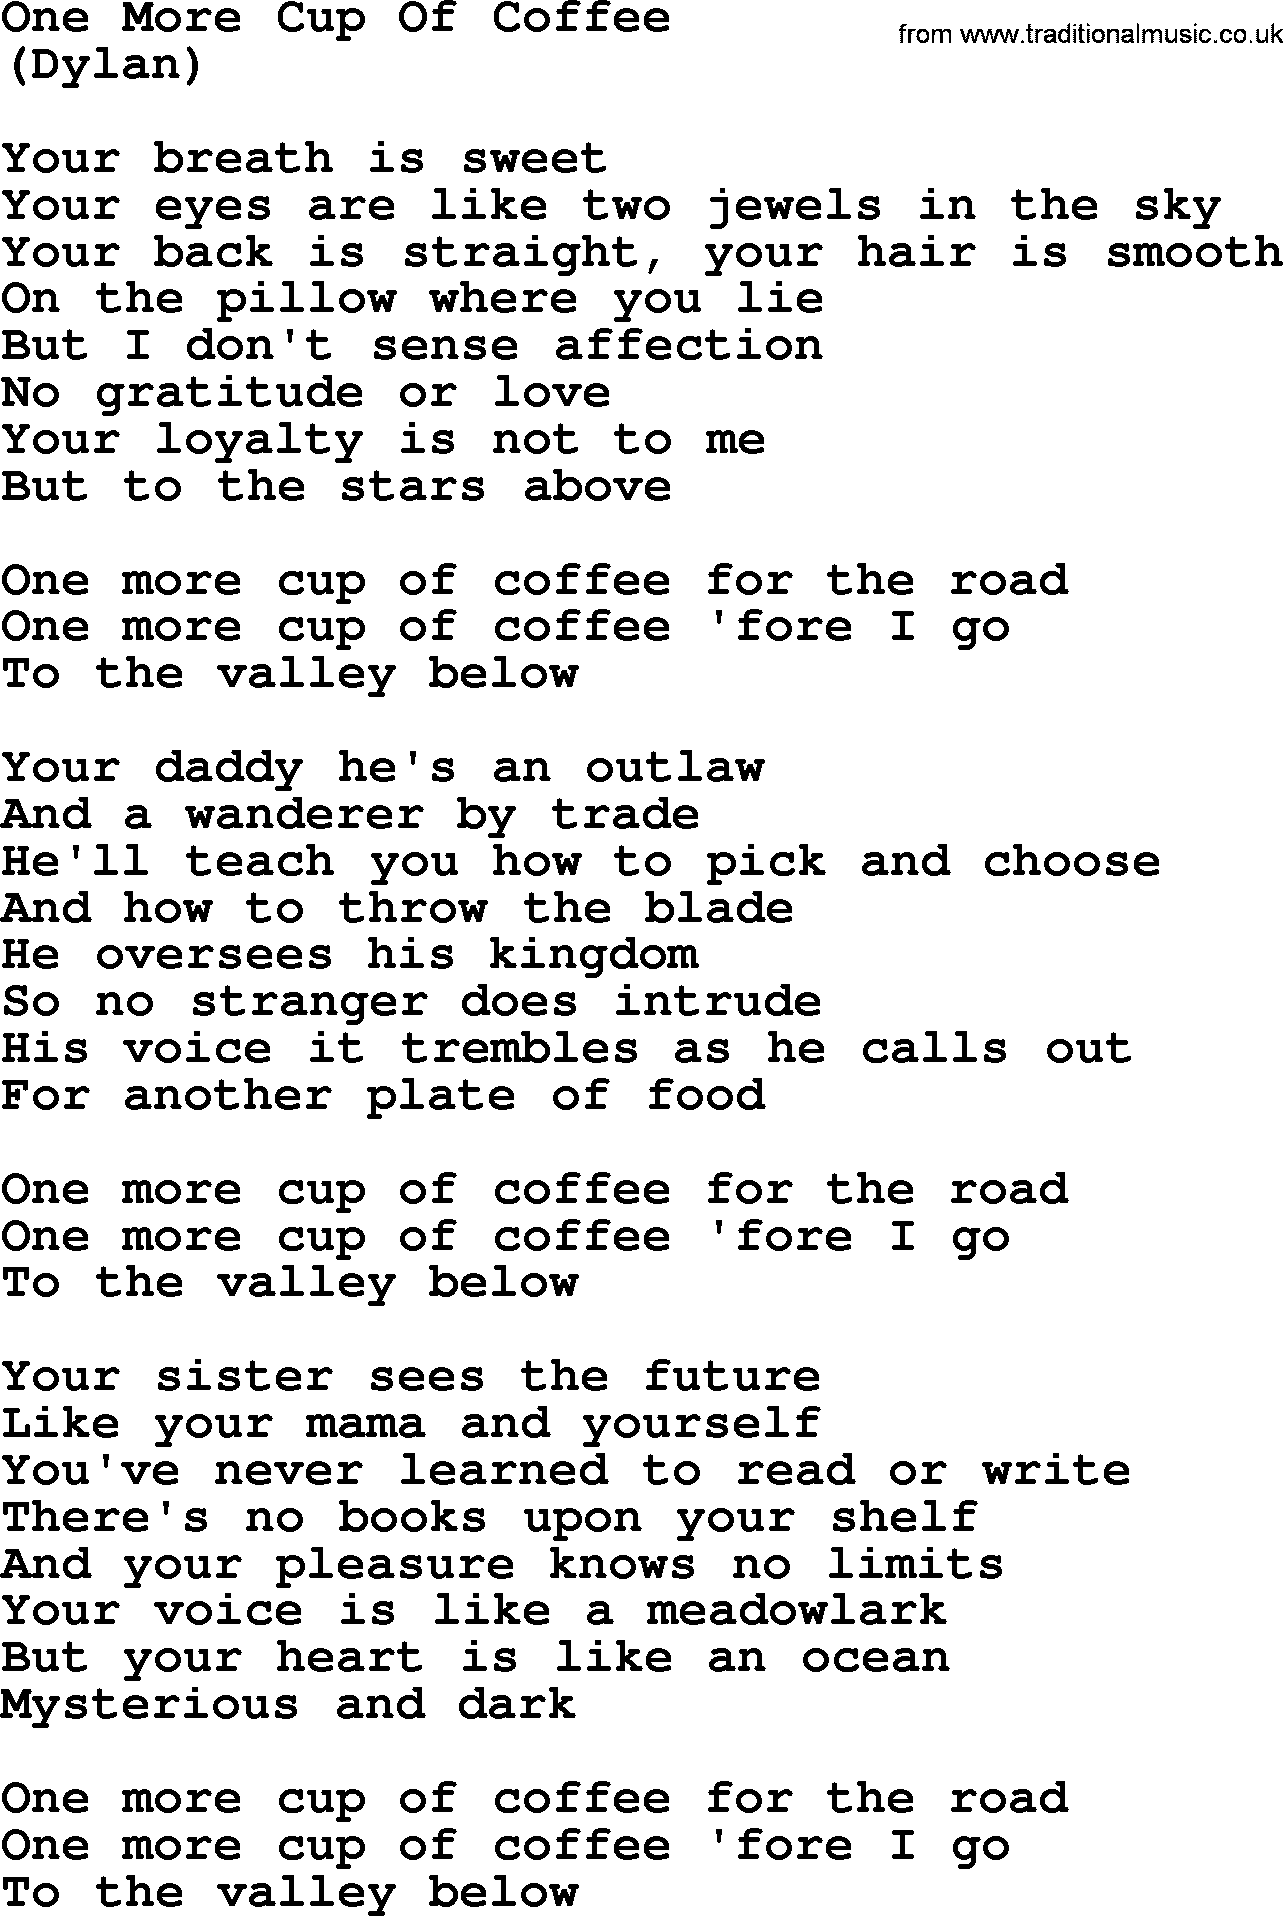 The Byrds song One More Cup Of Coffee, lyrics